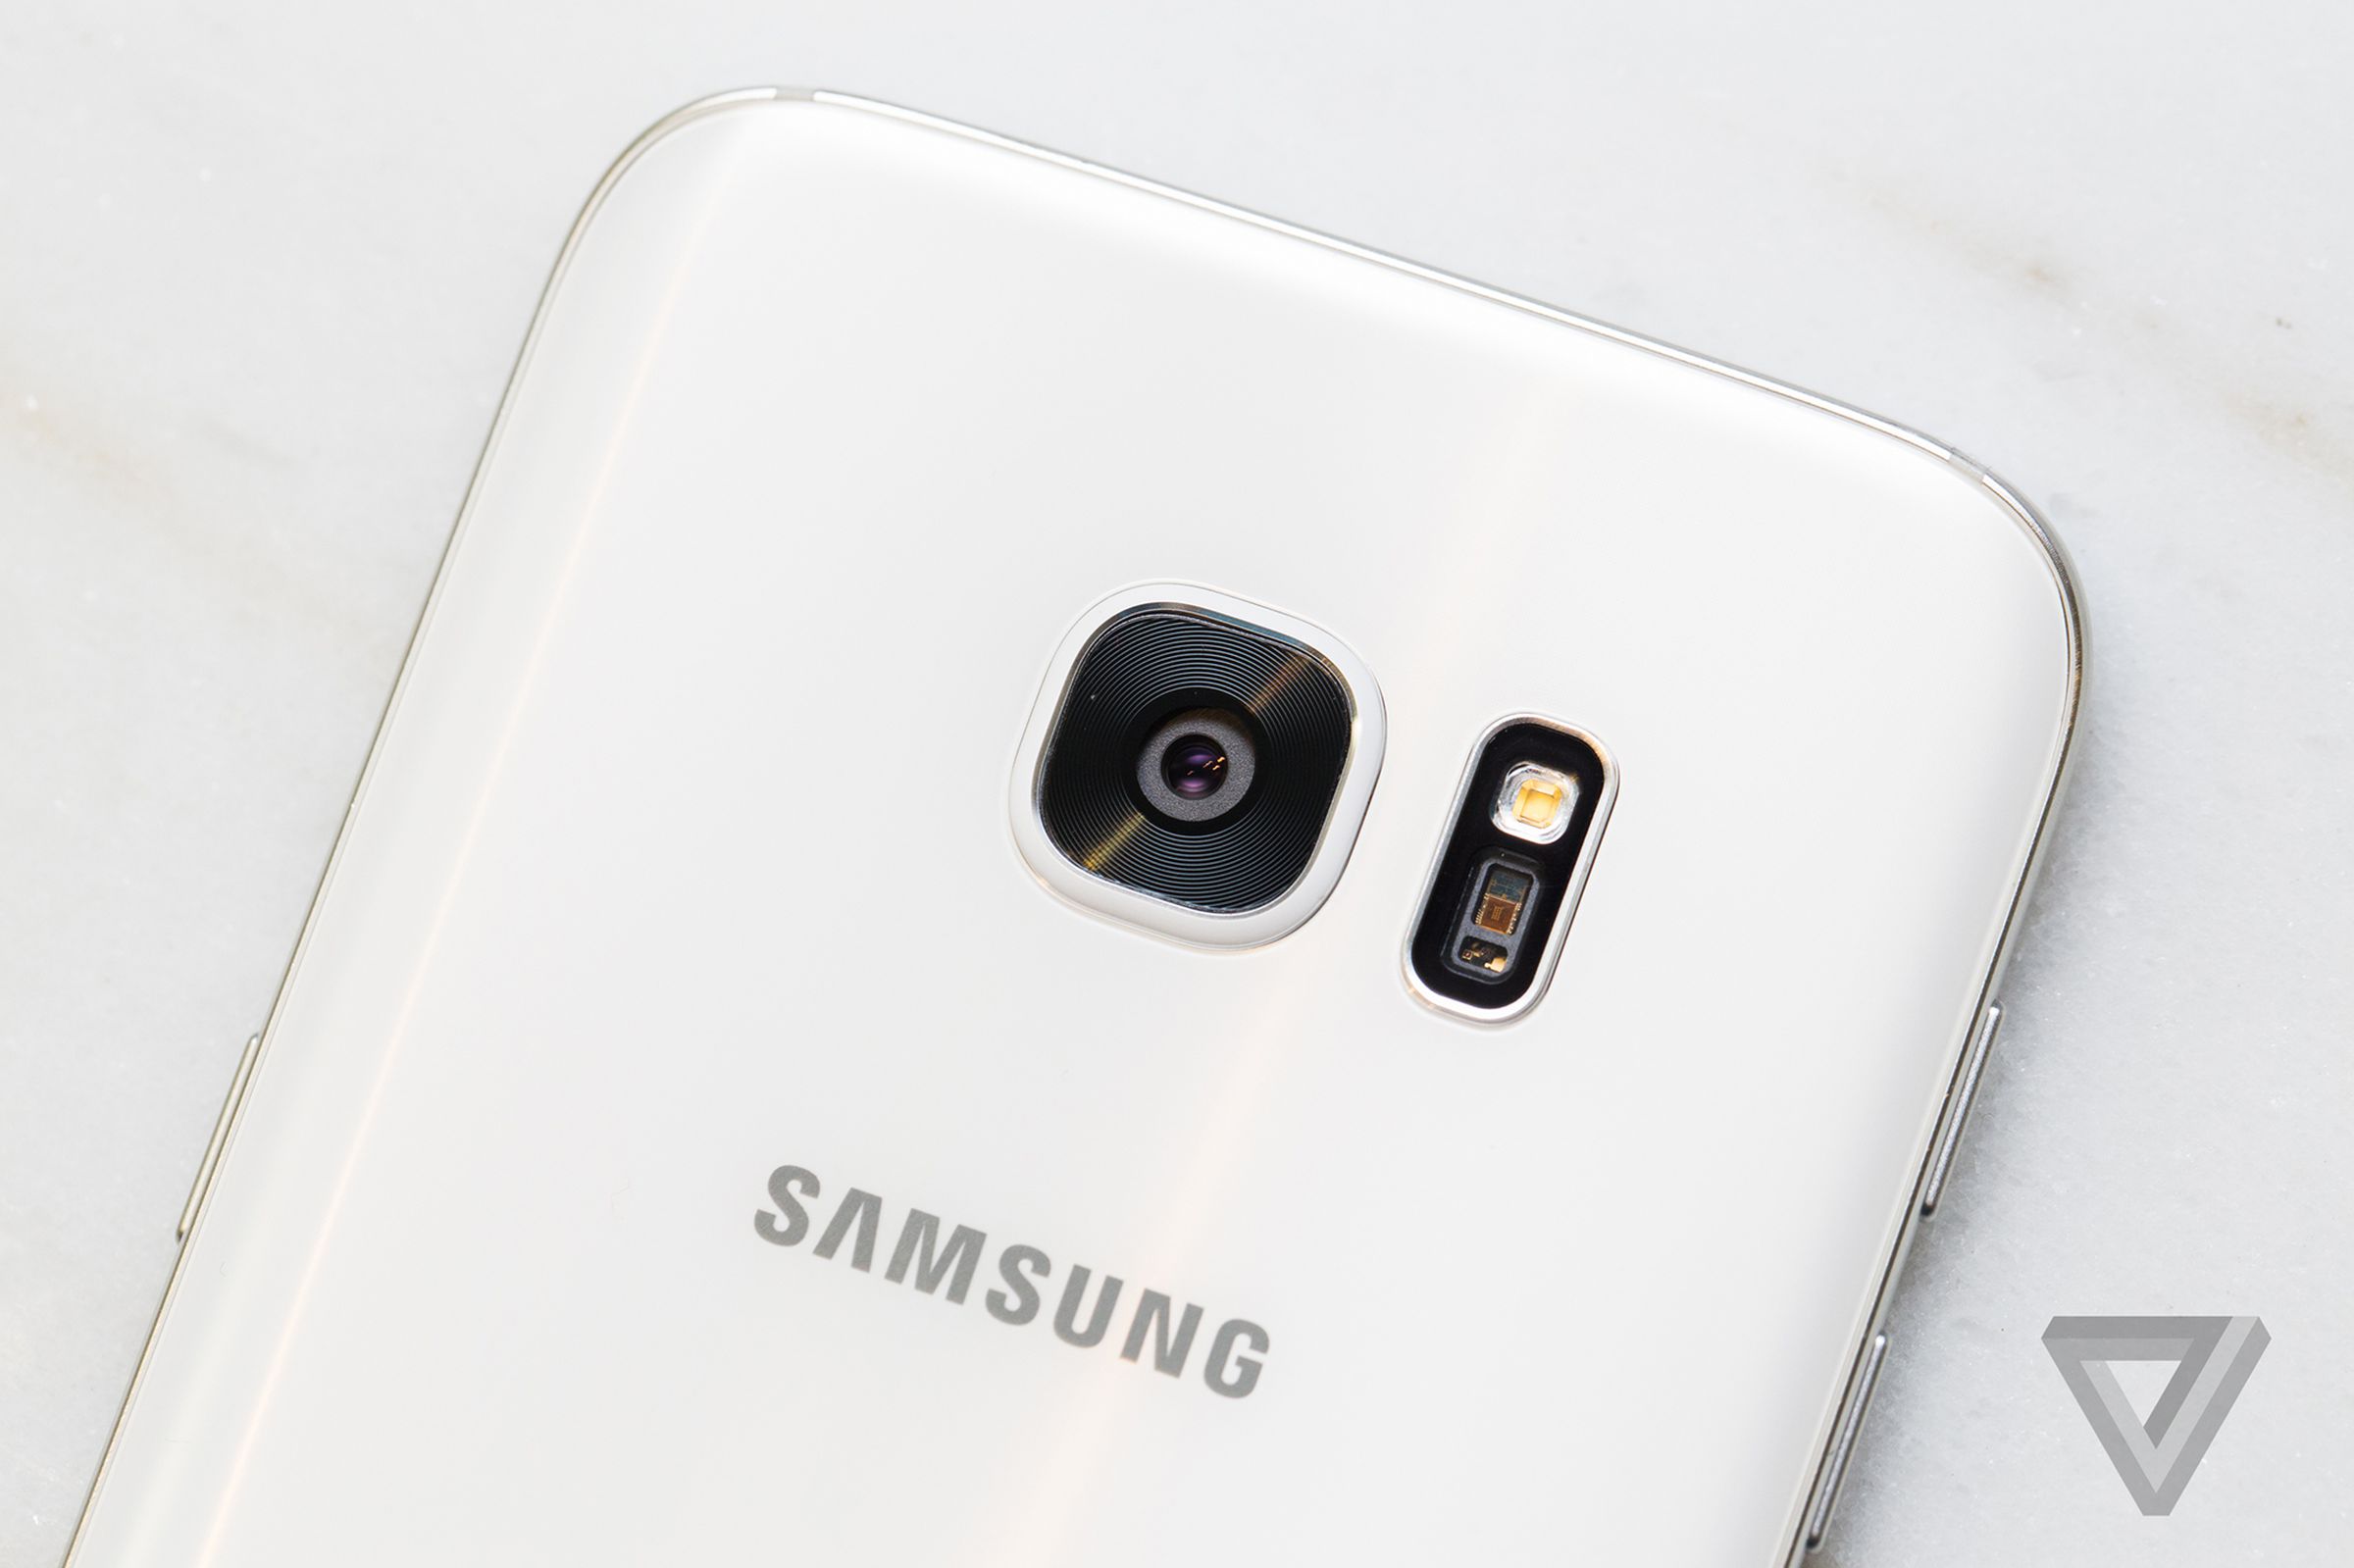 Samsung Galaxy S7 and S7 Edge pictures